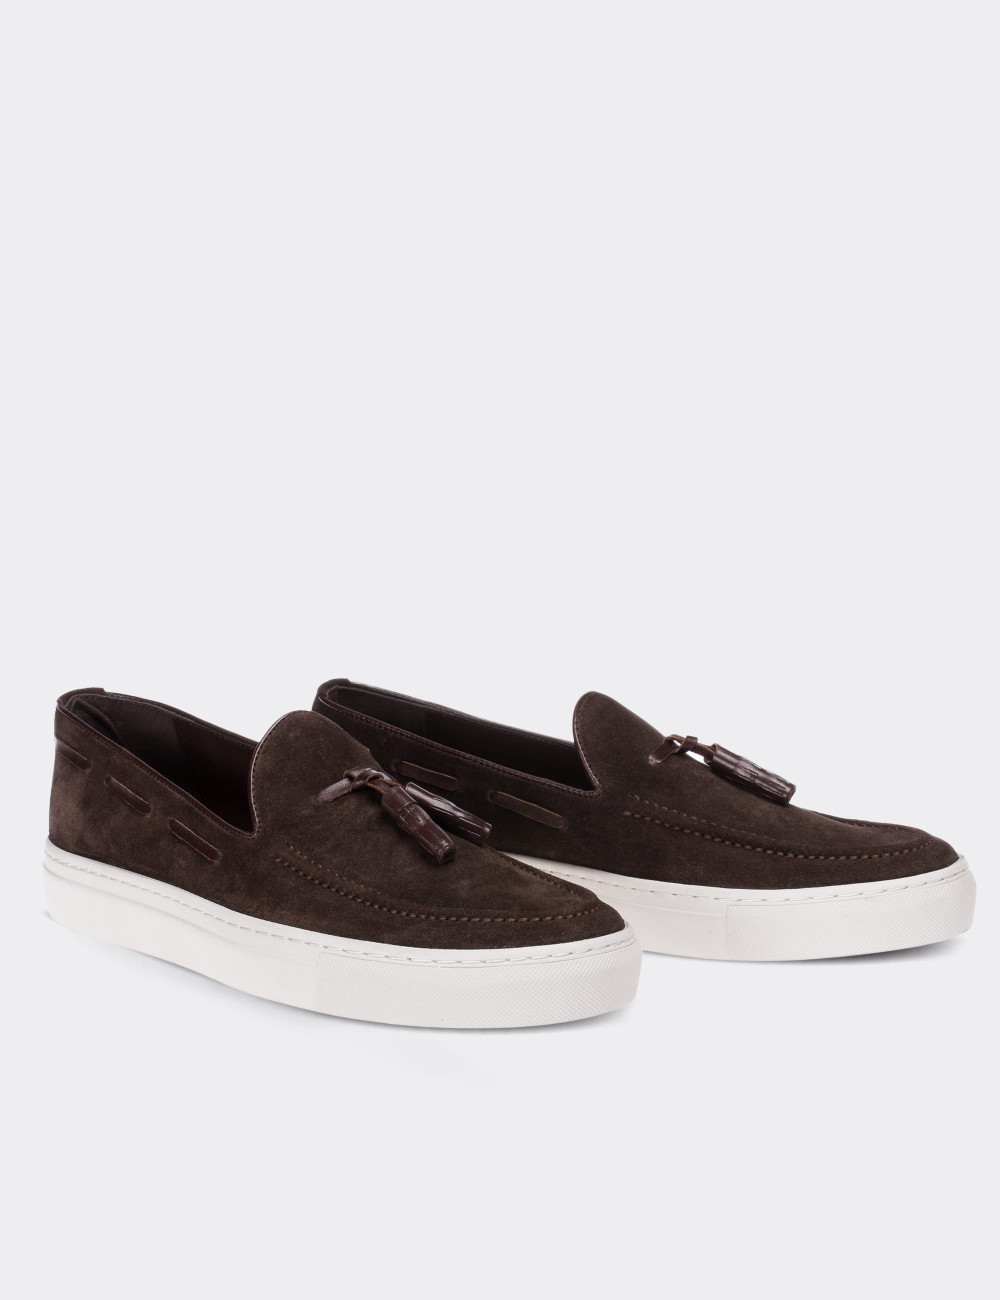 Brown Suede Leather Loafers - 01713MKHVC02